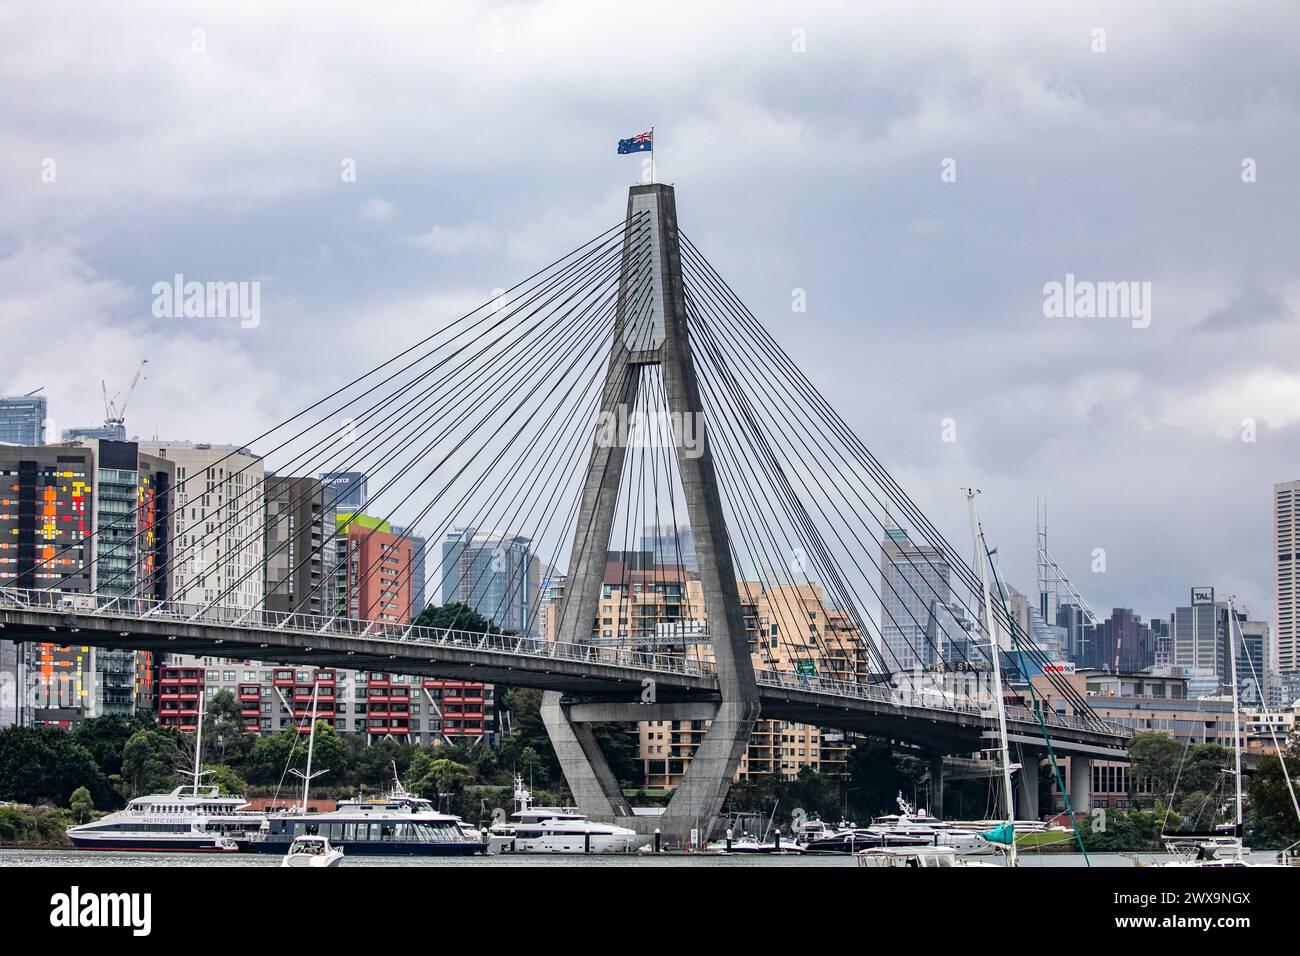 Anzac Bridge in Sydney, australian flag flying, bridge spans between Payment and Glebe and carries vehicular traffic on the Western Distributor Stock Photo